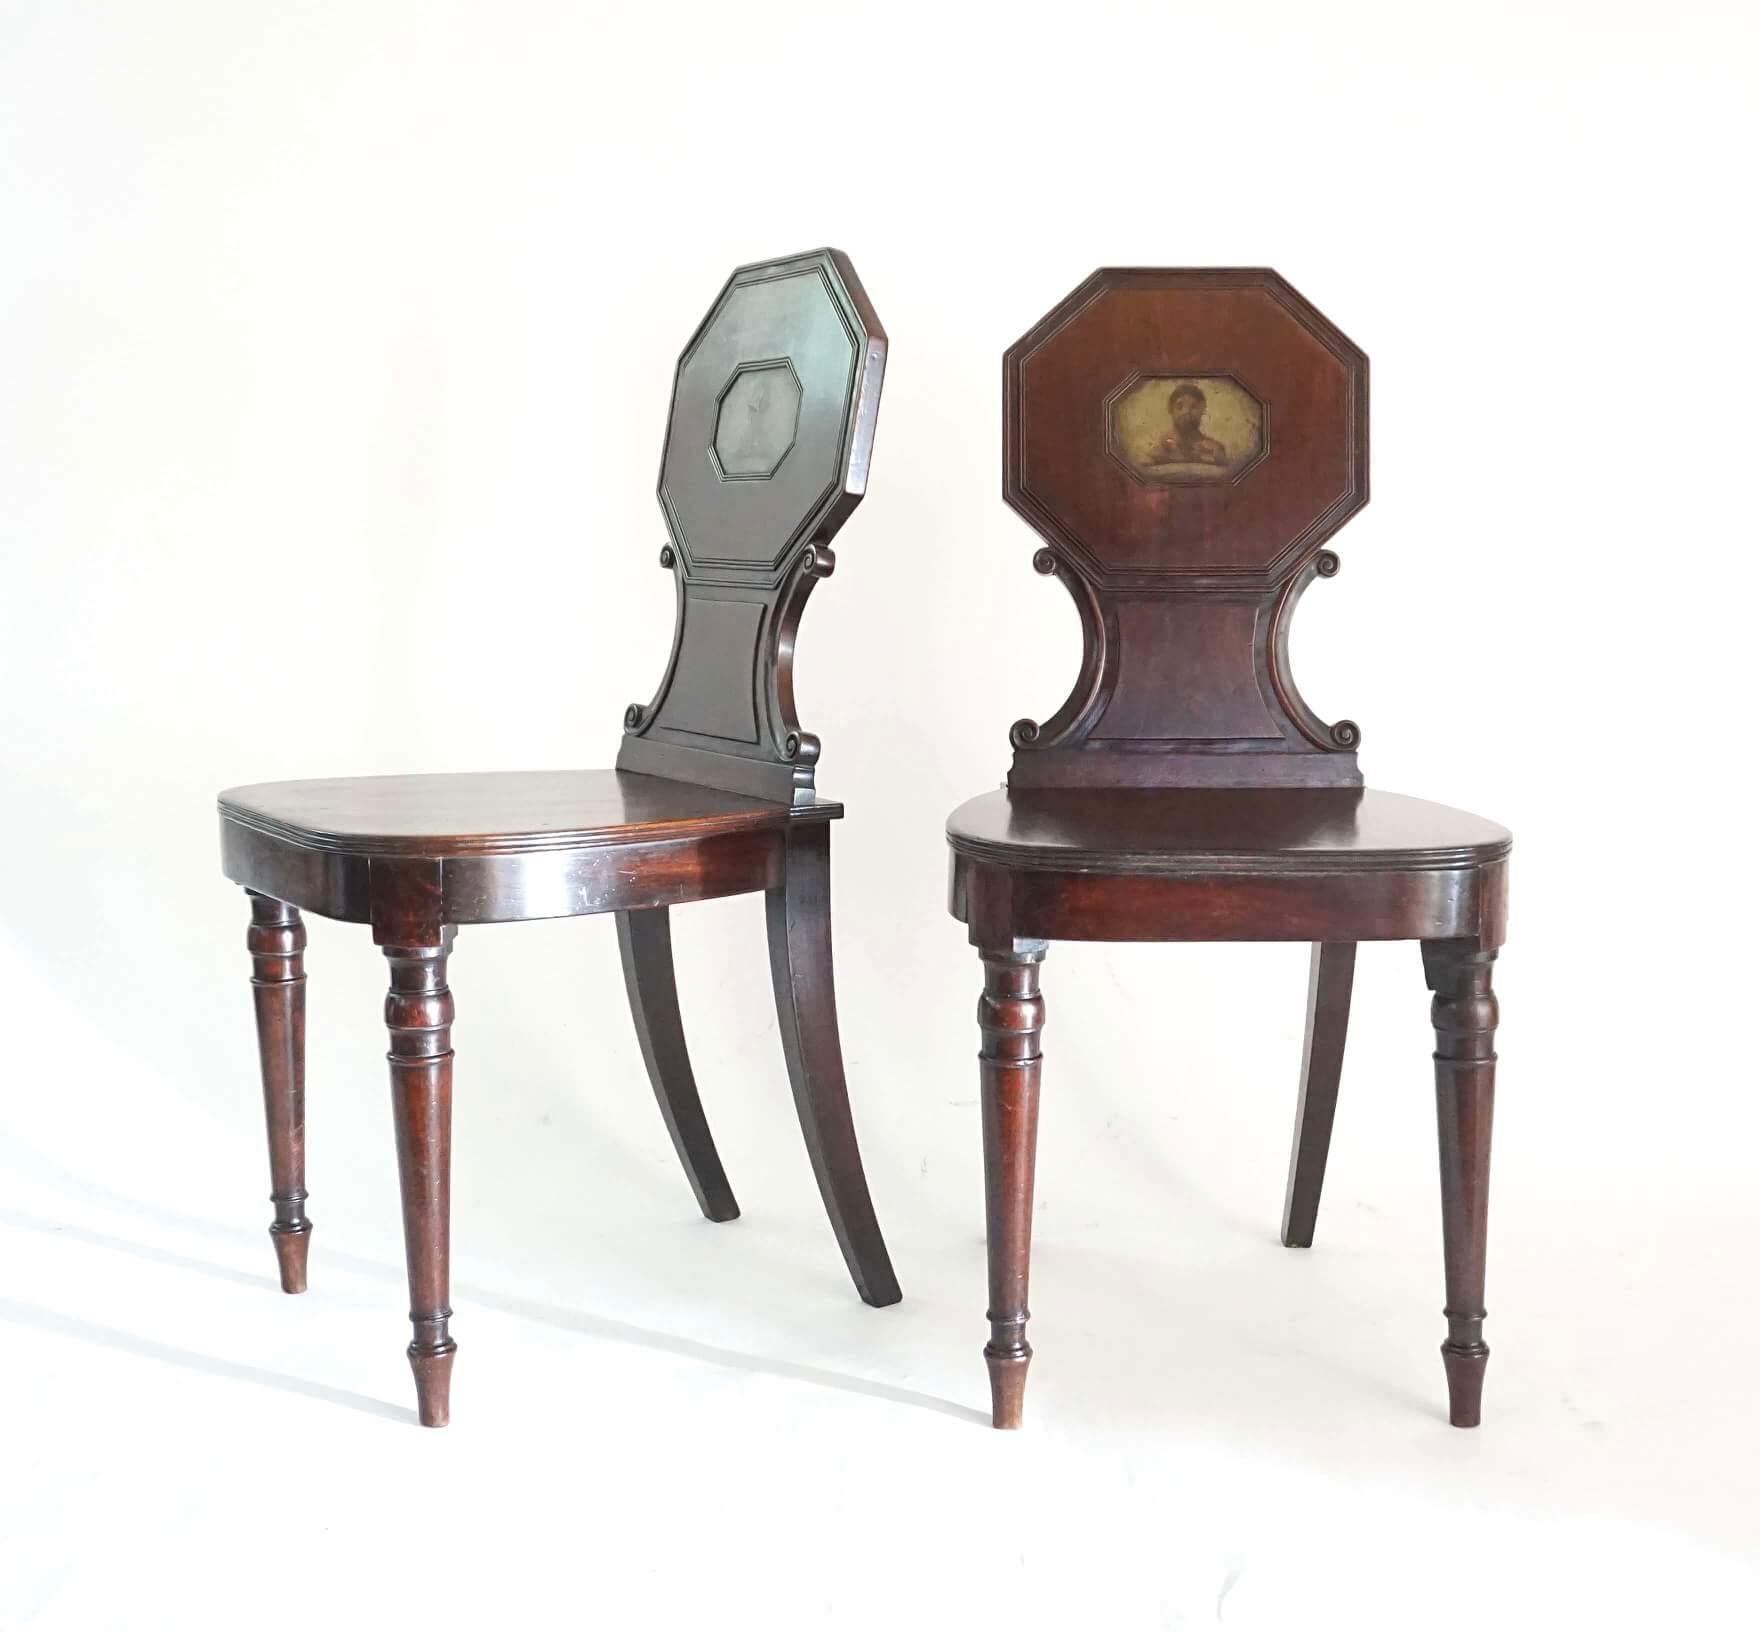 A fine pair of circa 1805 English George III period hall chairs of solid mahogany construction having octagonal tablet form back-rests with original hand-painted Adair family armorial heraldic crest of 'Savage's Head' on side-scrolled plinths